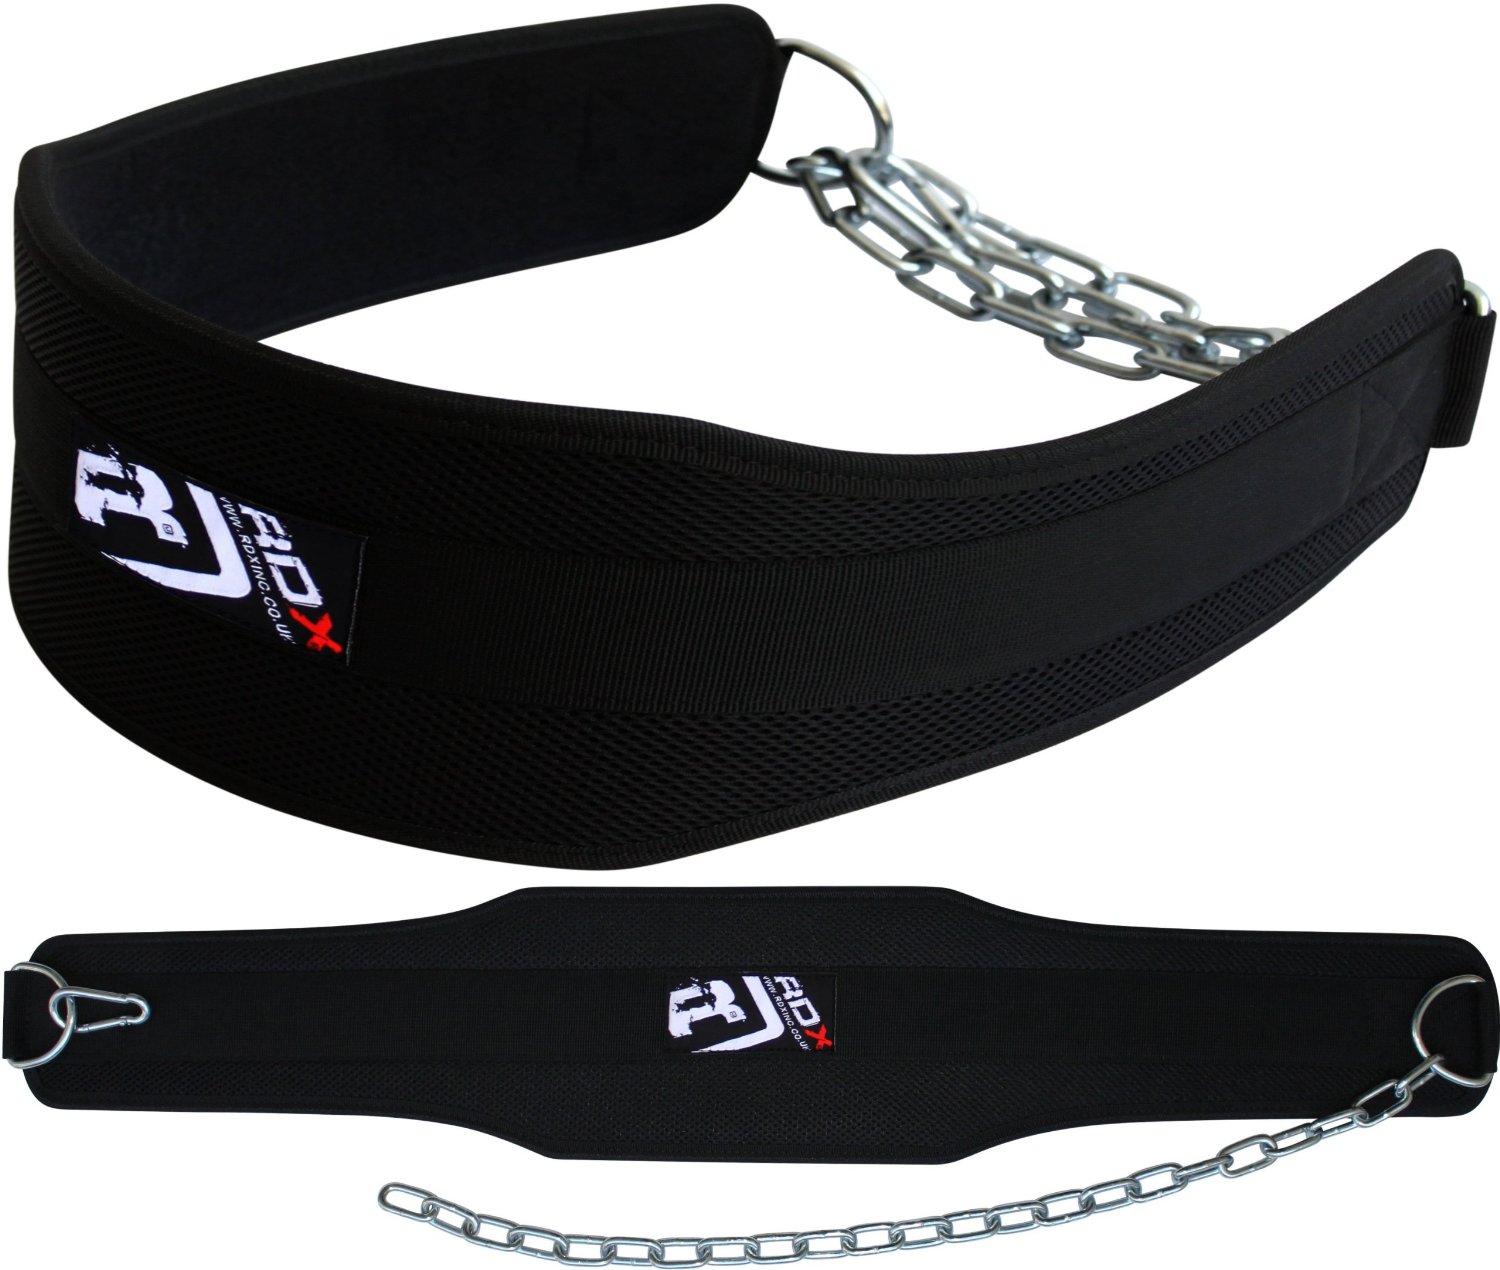 Buy the Authentic RDX Dipping Belt